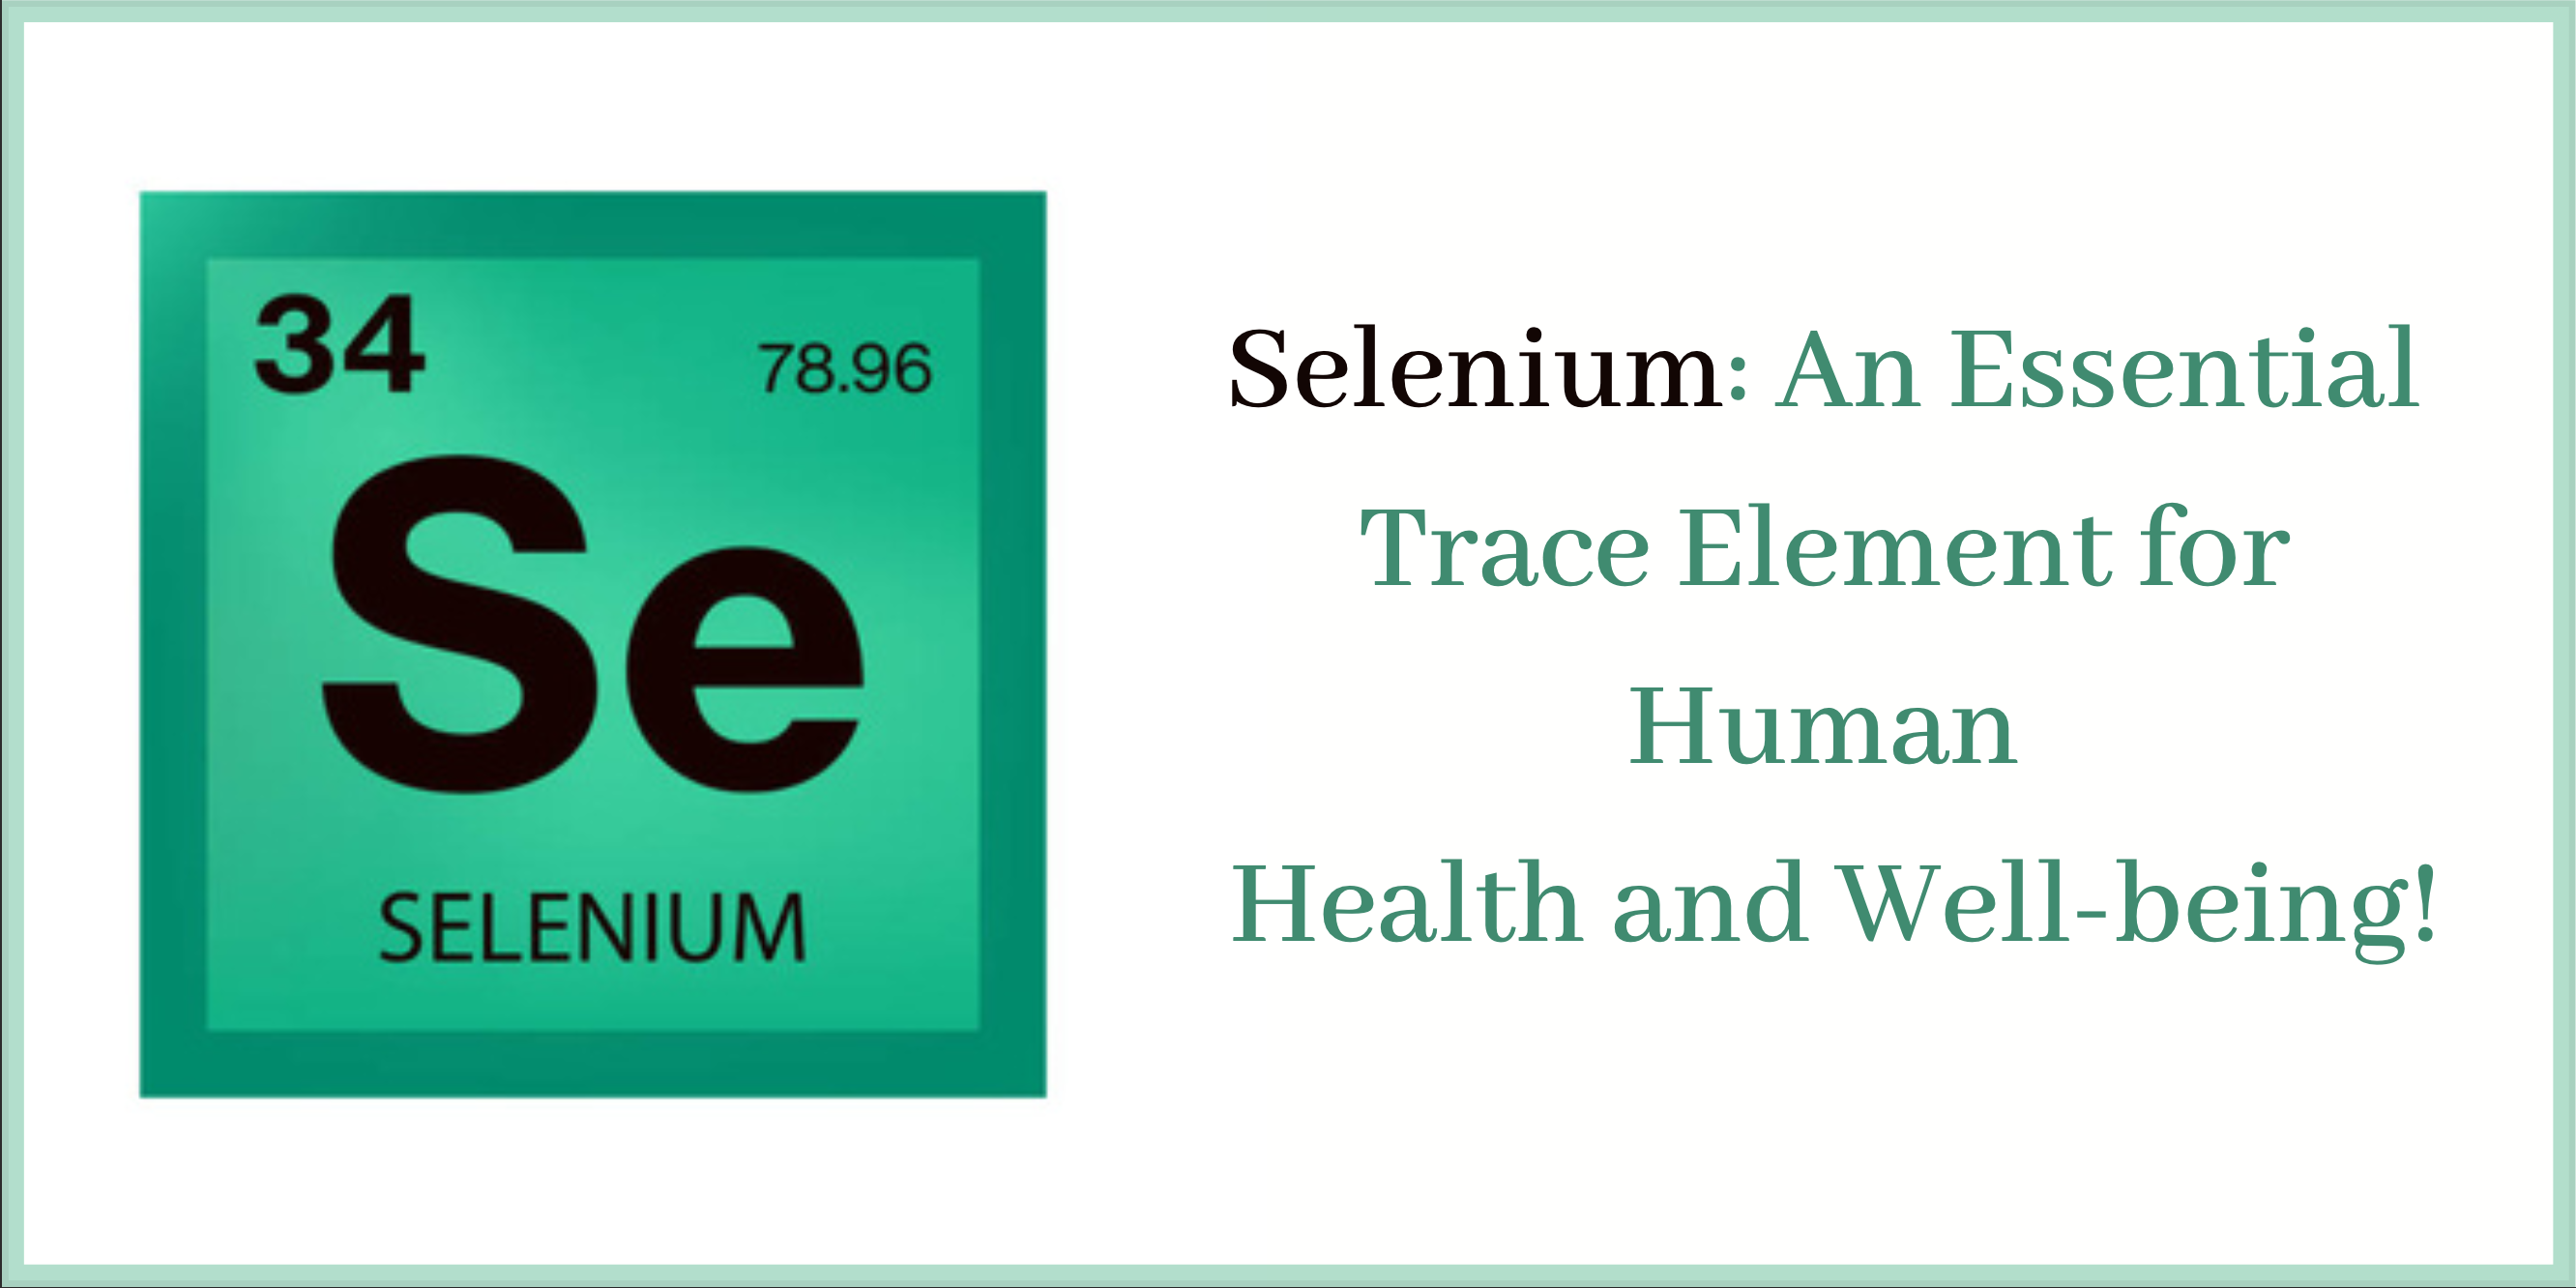 Selenium: An Essential Trace Element for Human Health and Well-being